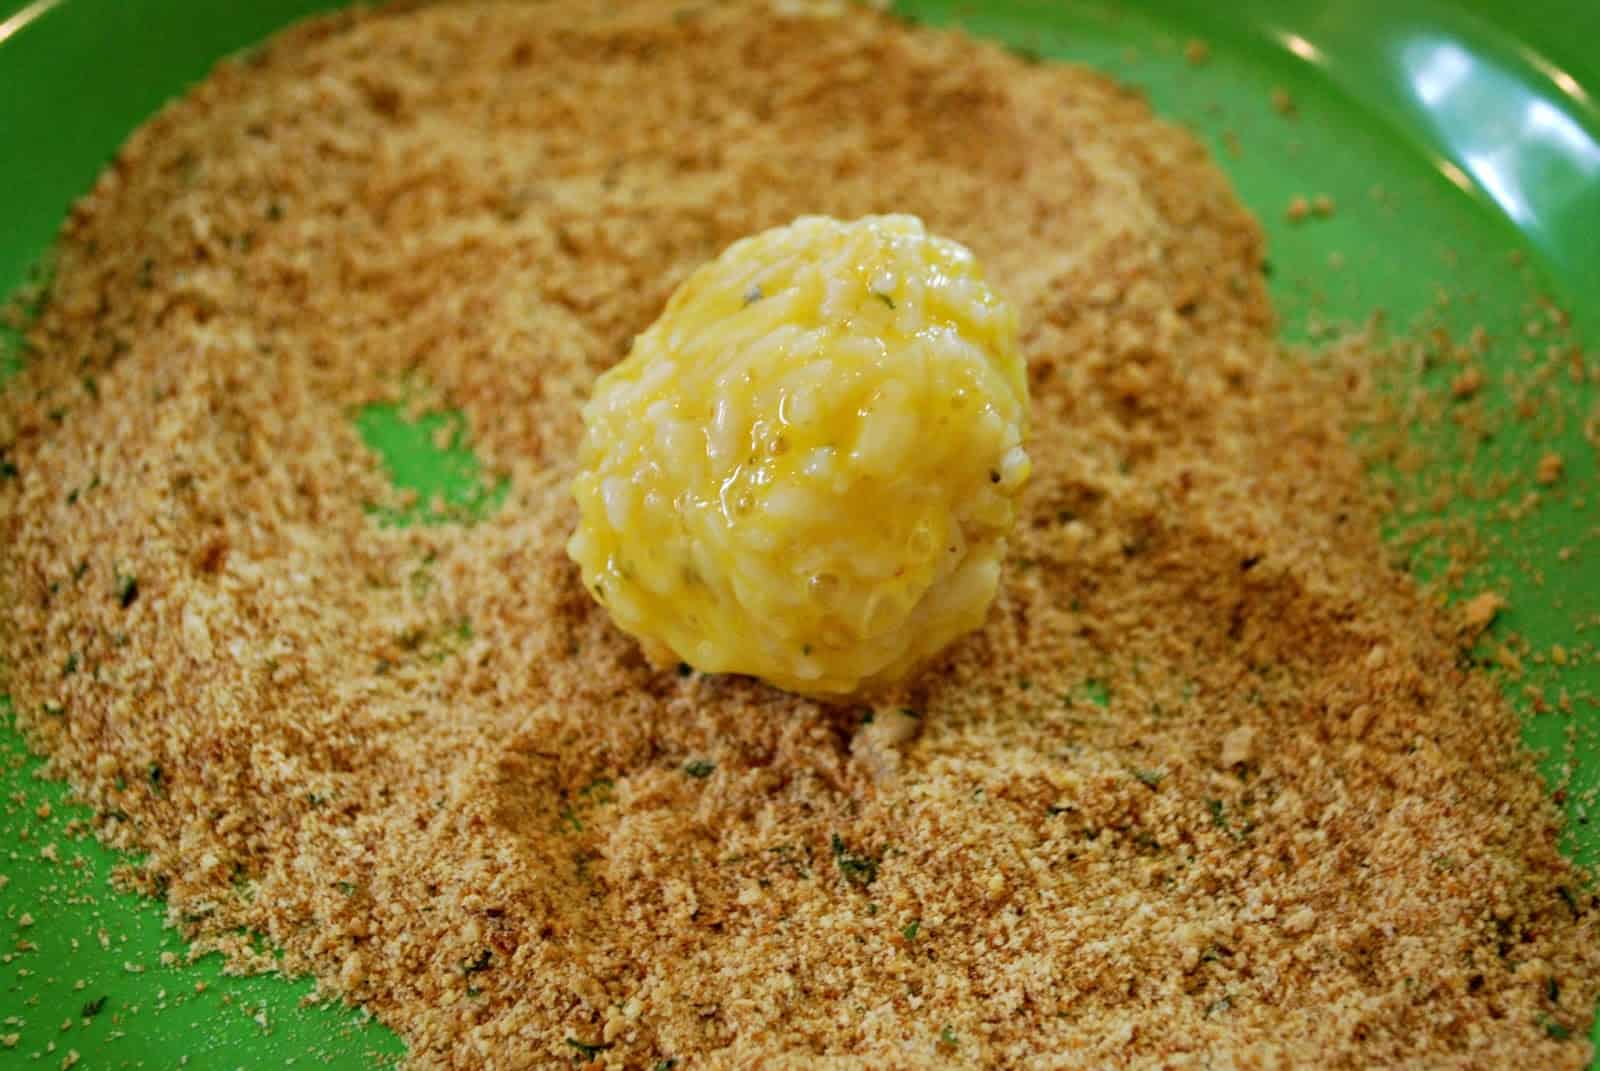 arancini dipped in egg and bread crumbs